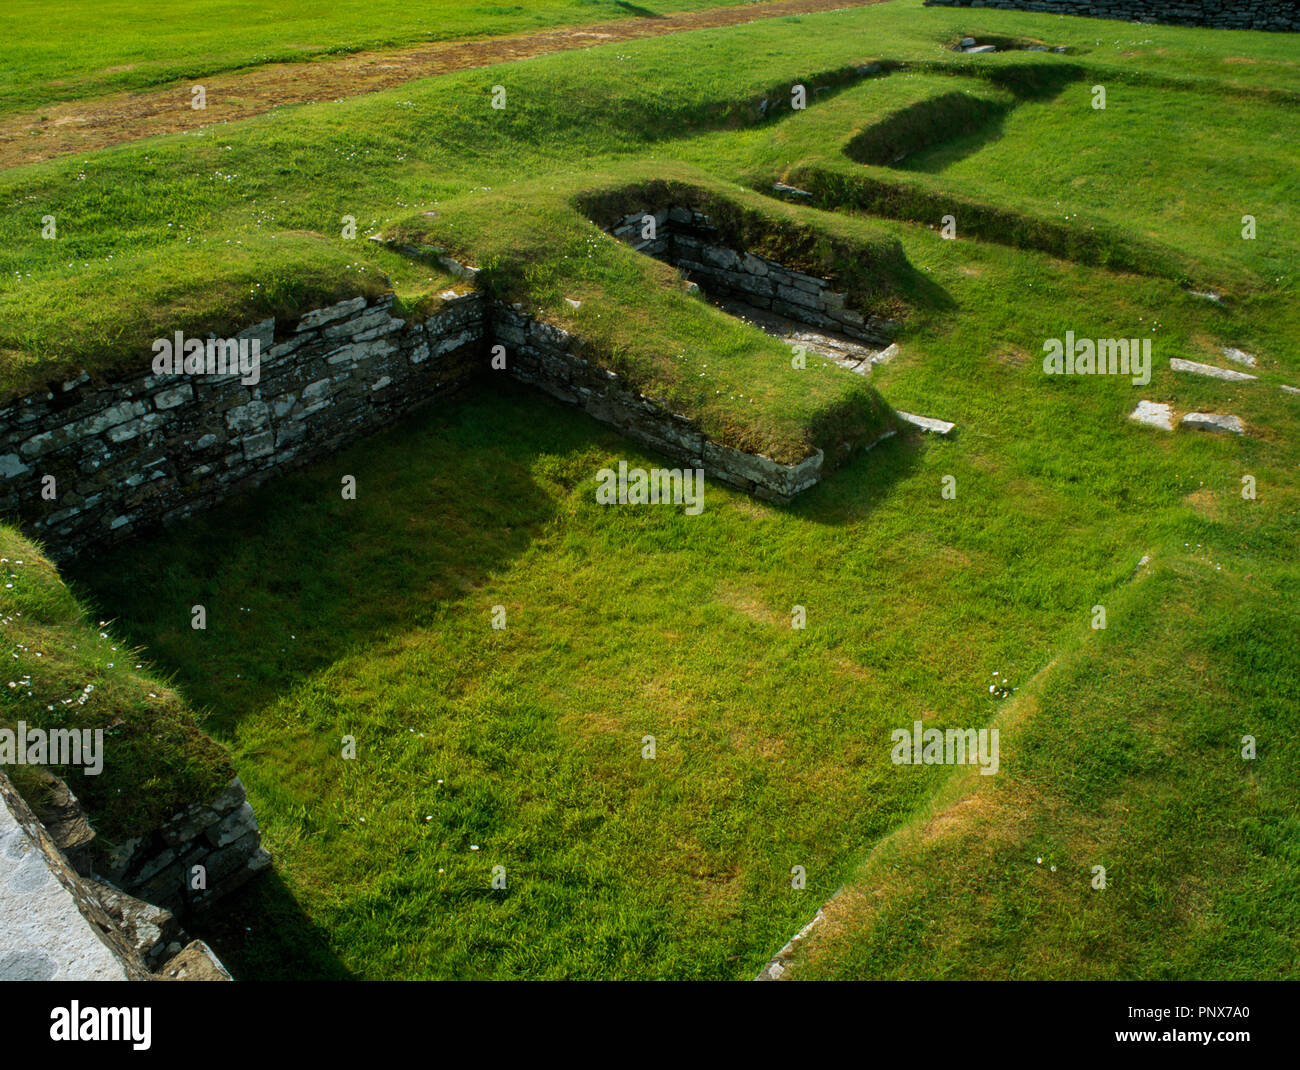 View NW of the foundations of a Viking-age building at Orphir, Orkney, Scotland, UK, thought to be the drinking hall (Earl's Bu) mentioned in sagas. Stock Photo